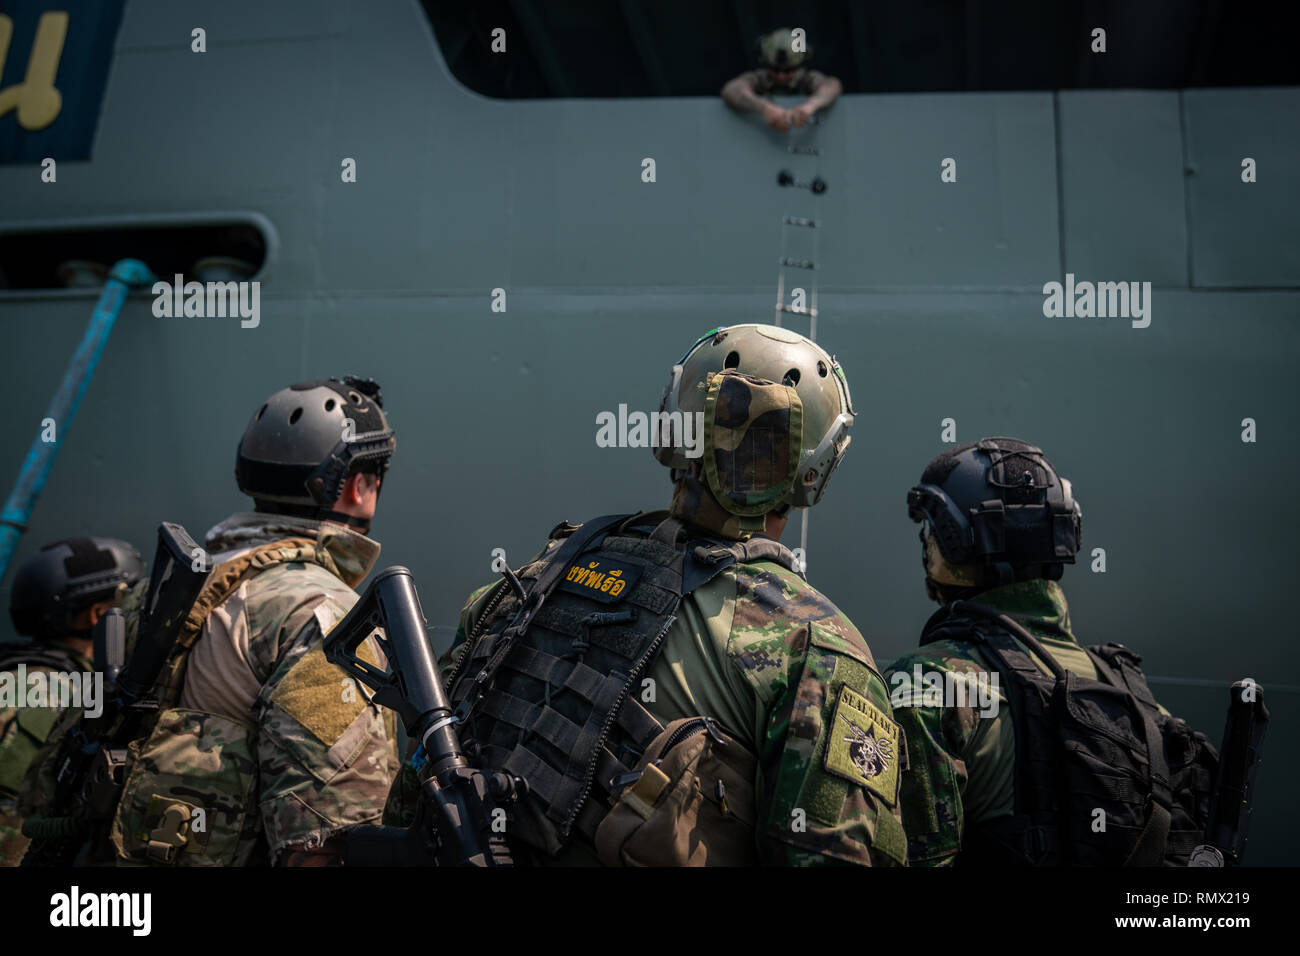 U.S. Navy SEALS with SEAL Team 5 and Royal Thai Navy SEALs conduct visit, board, search and seizure training during exercise Cobra Gold in Sattahip, Kingdom of Thailand, Feb. 15, 2019. Cobra Gold 19 provides a venue for the United States and partner nations to advance interoperability and increase partner capacity in planning and executing complex and realistic multinational force and combined task force operations. (U.S. Marine Corps photo by Staff Sgt. Matthew J. Bragg) Stock Photo